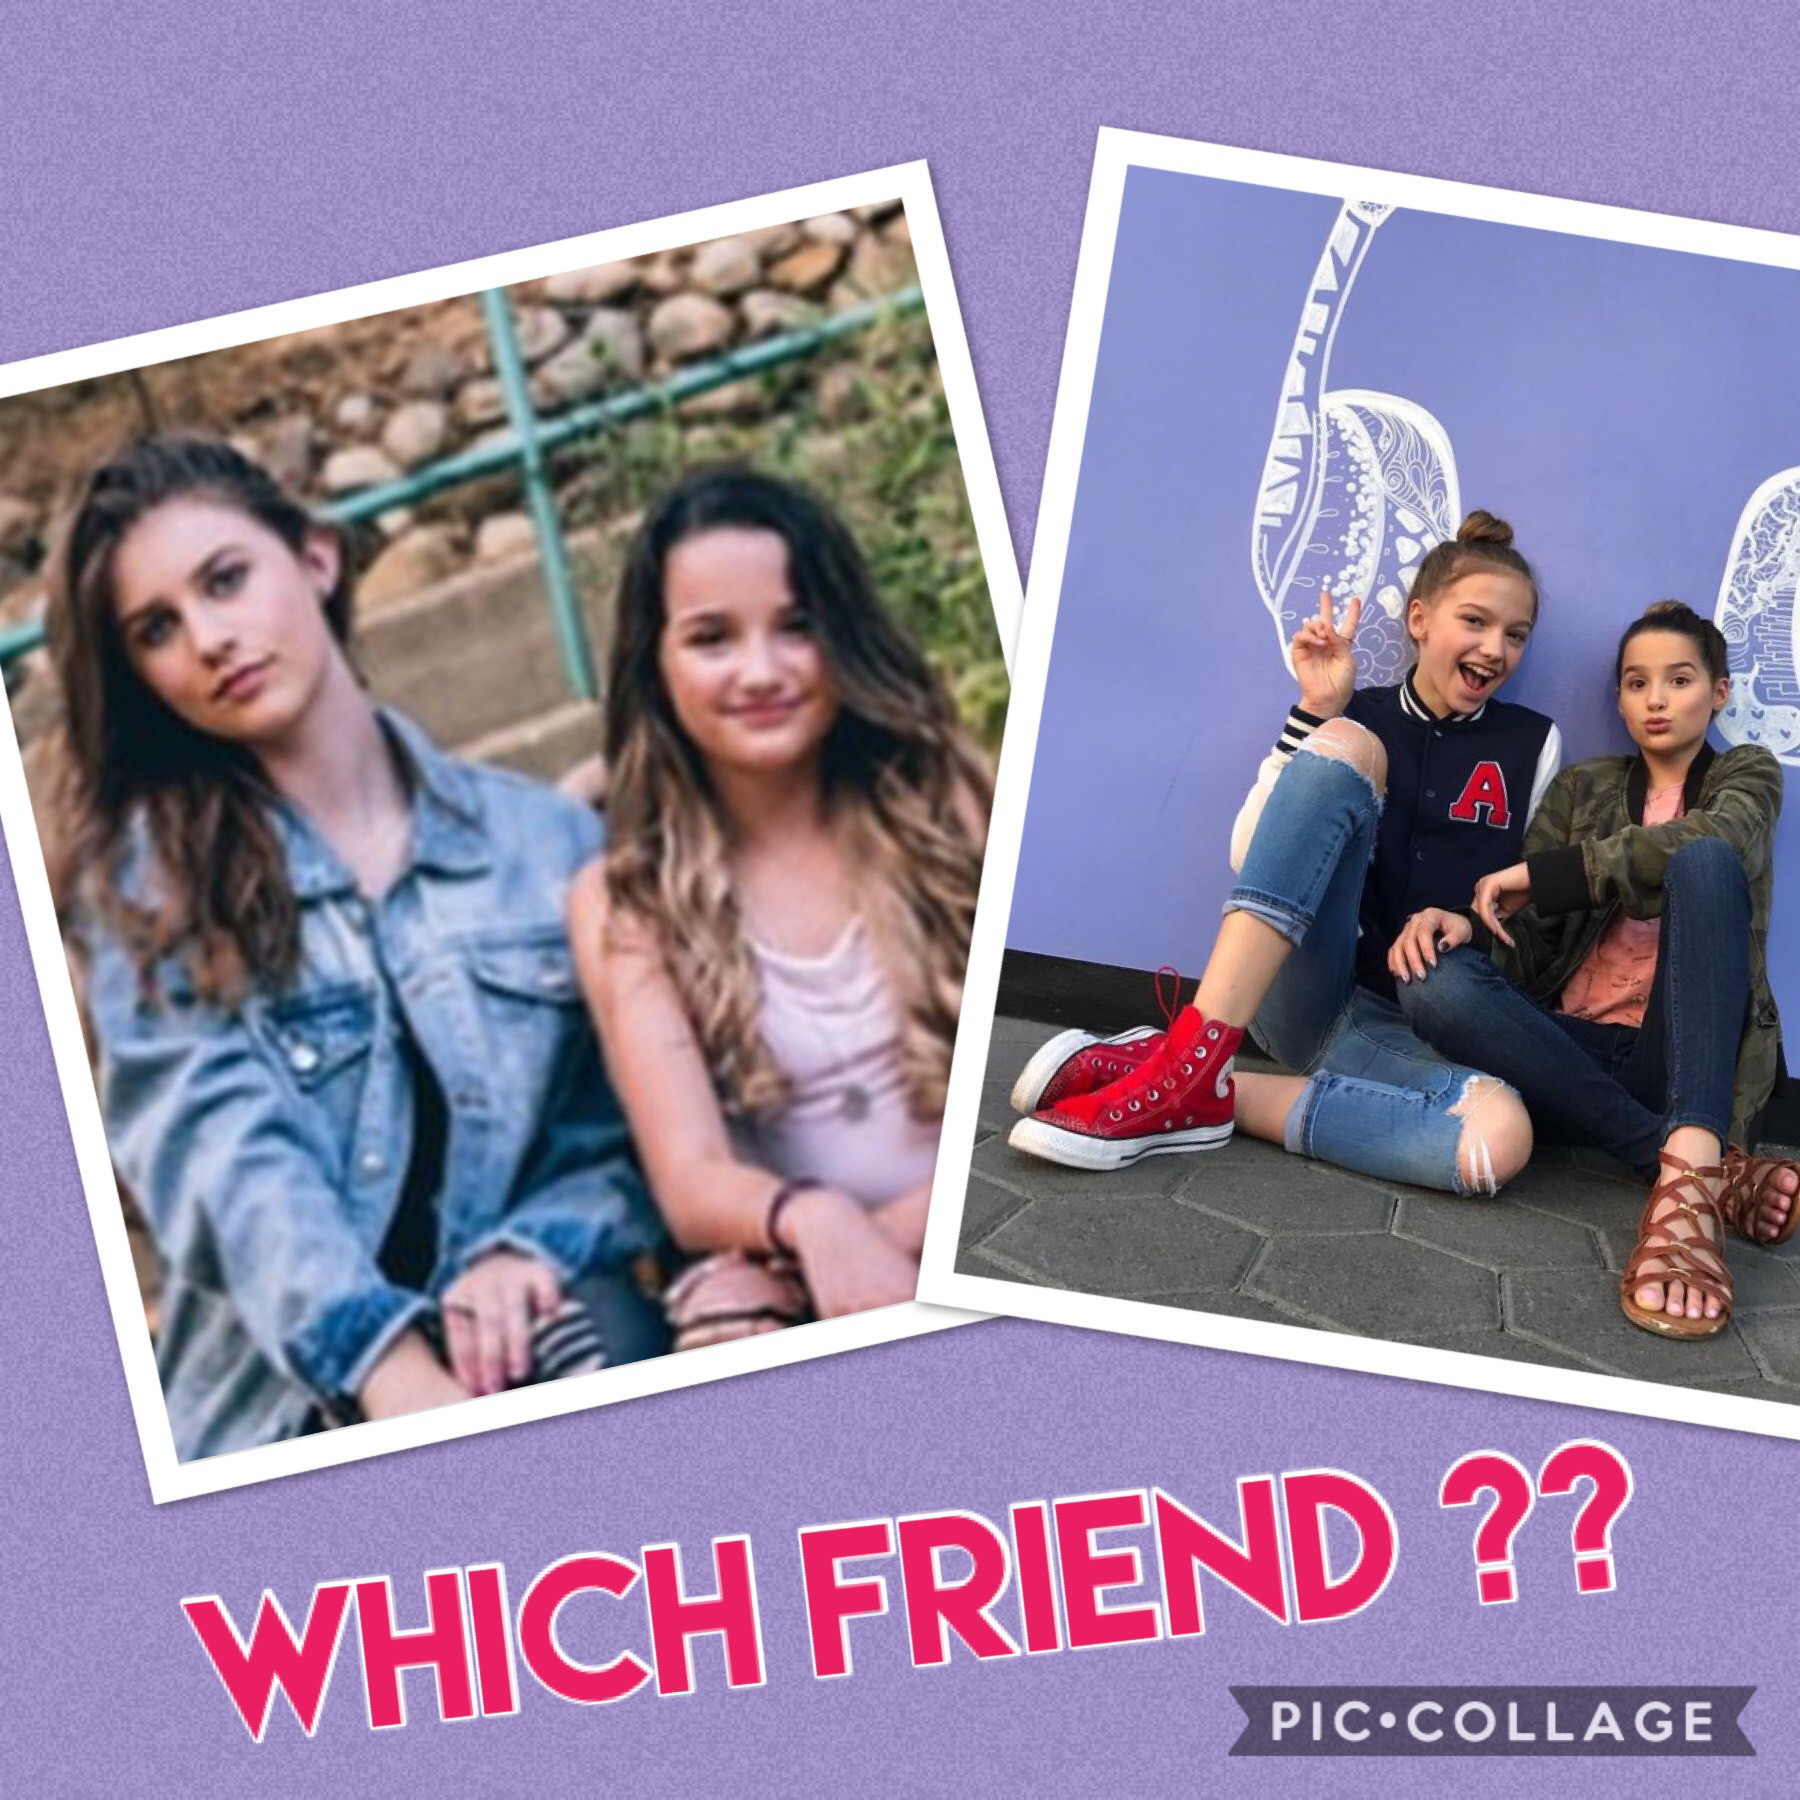 Which friend would you have??